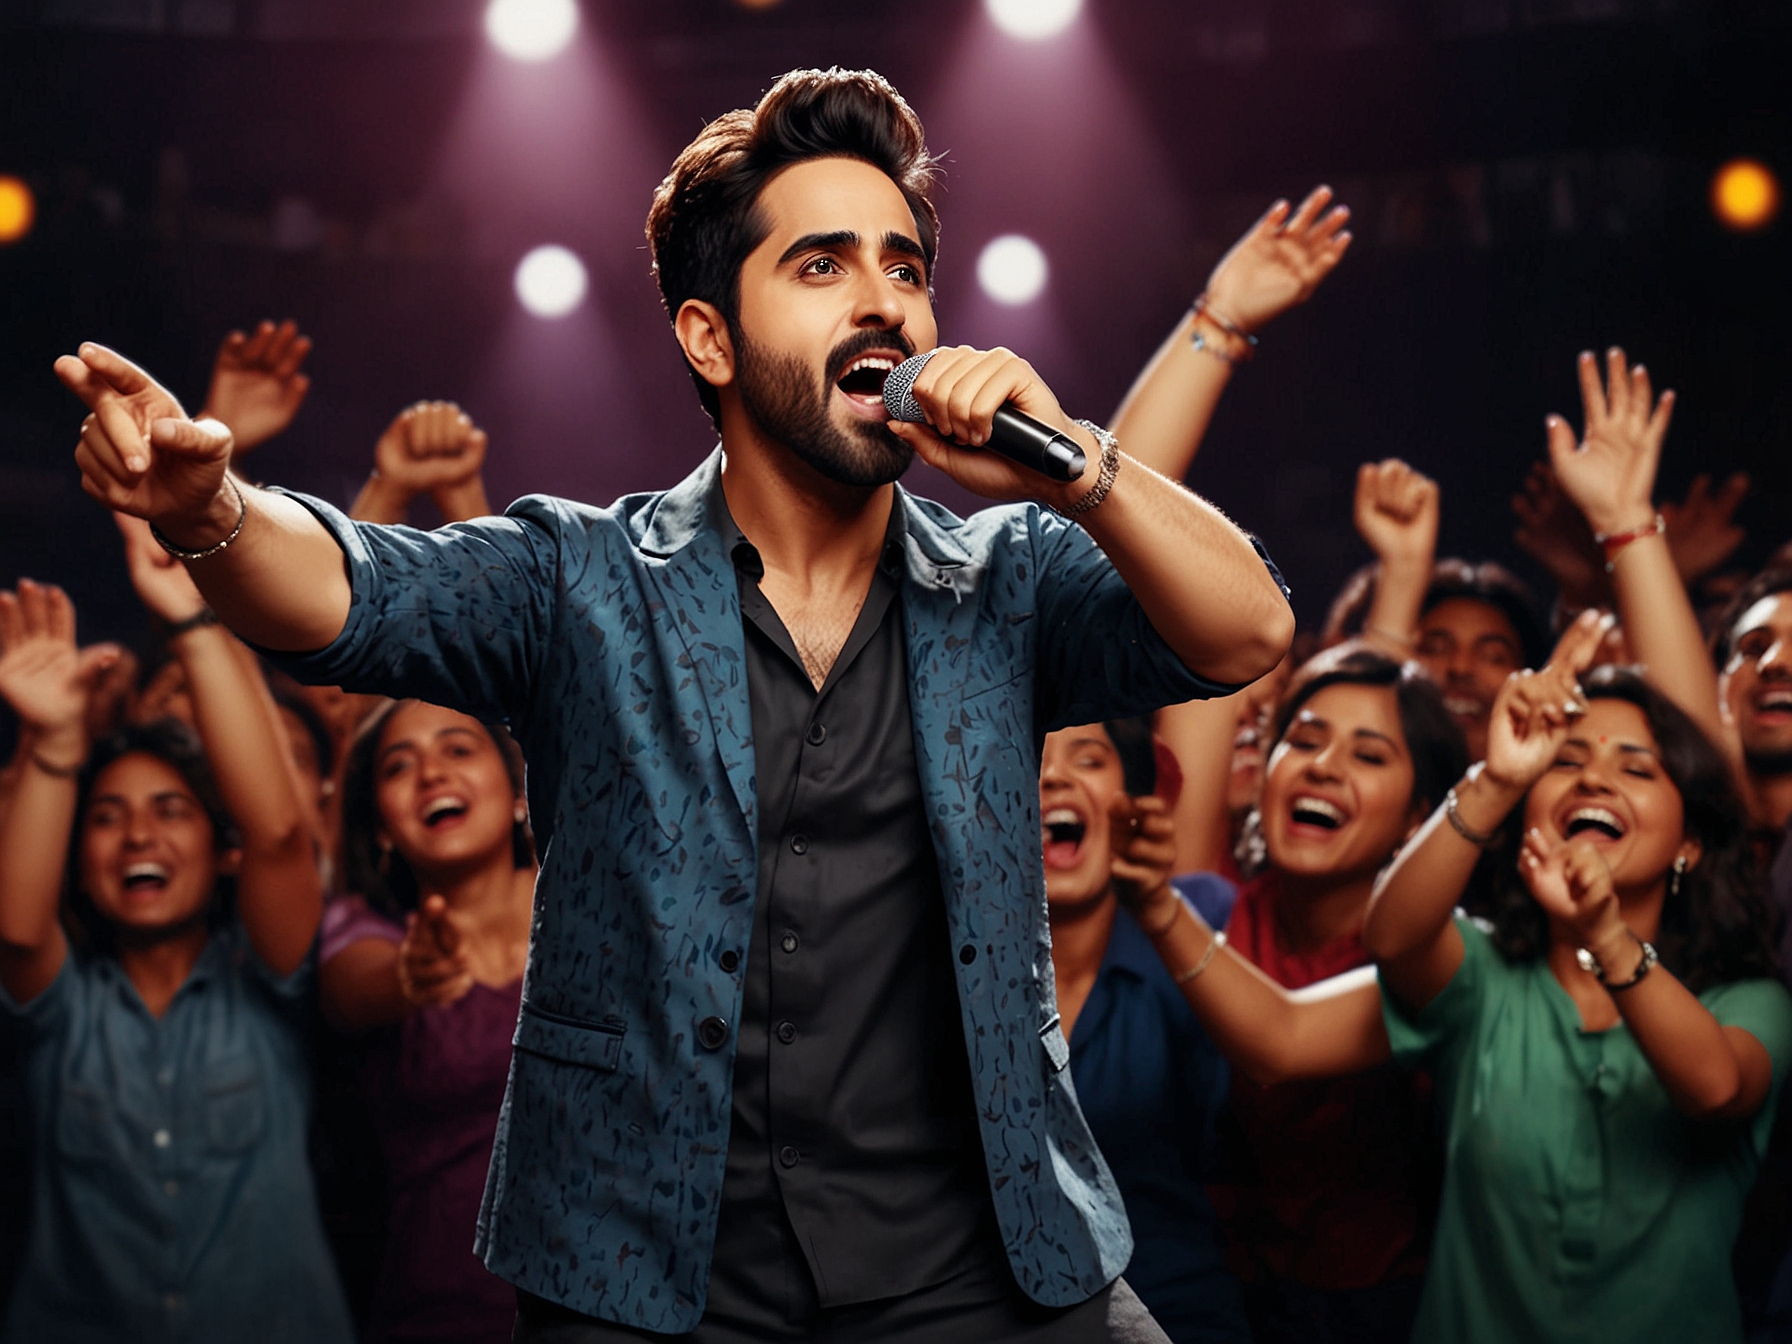 Ayushmann Khurrana performing passionately on stage, with vibrant lighting and an energetic audience, symbolizing the excitement and anticipation of his new track 'Reh Ja'.